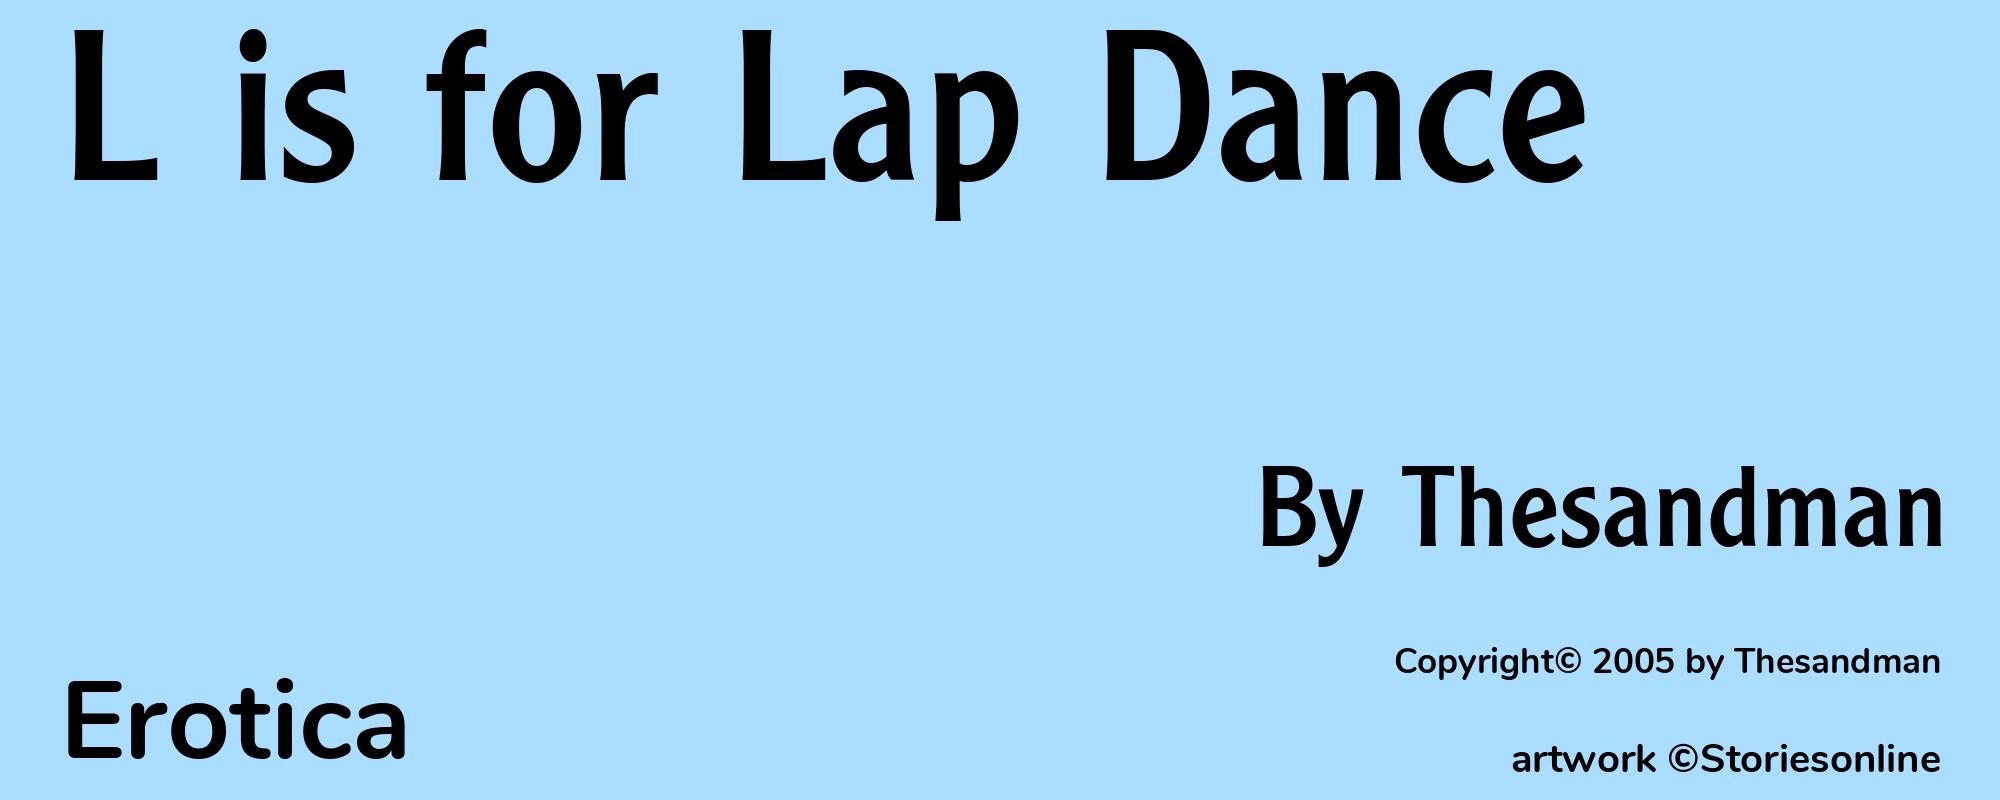 L is for Lap Dance - Cover